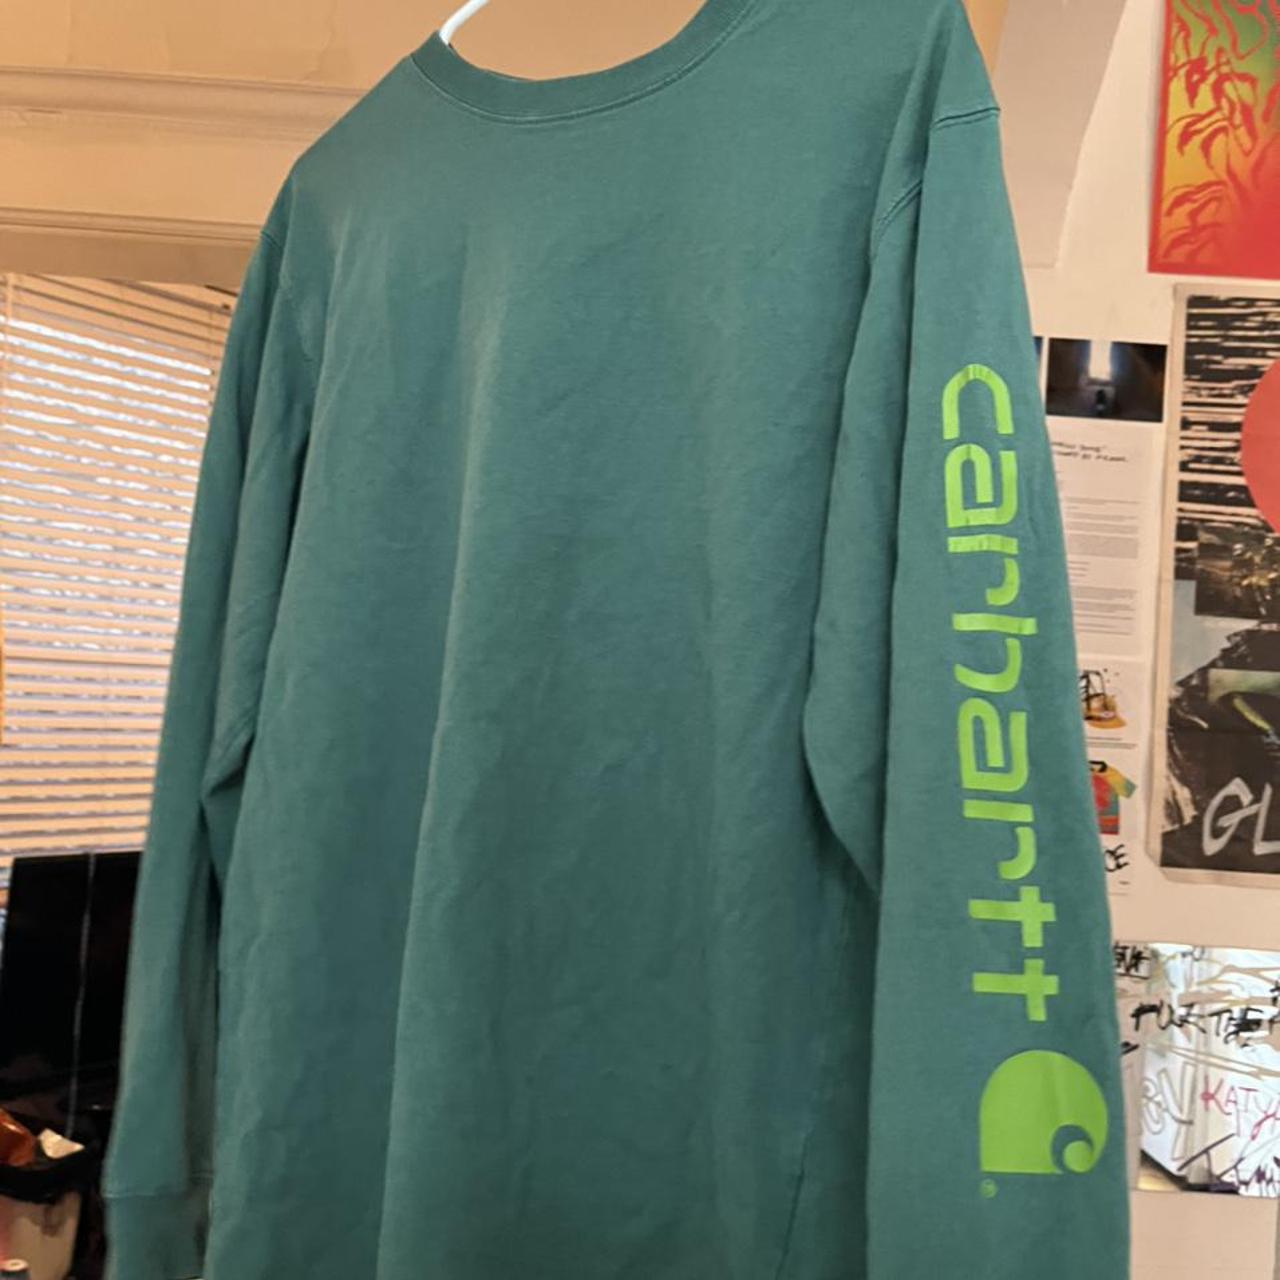 Product Image 2 - Green Carhartt Long-sleeve

Condition: 8/10

Fits like